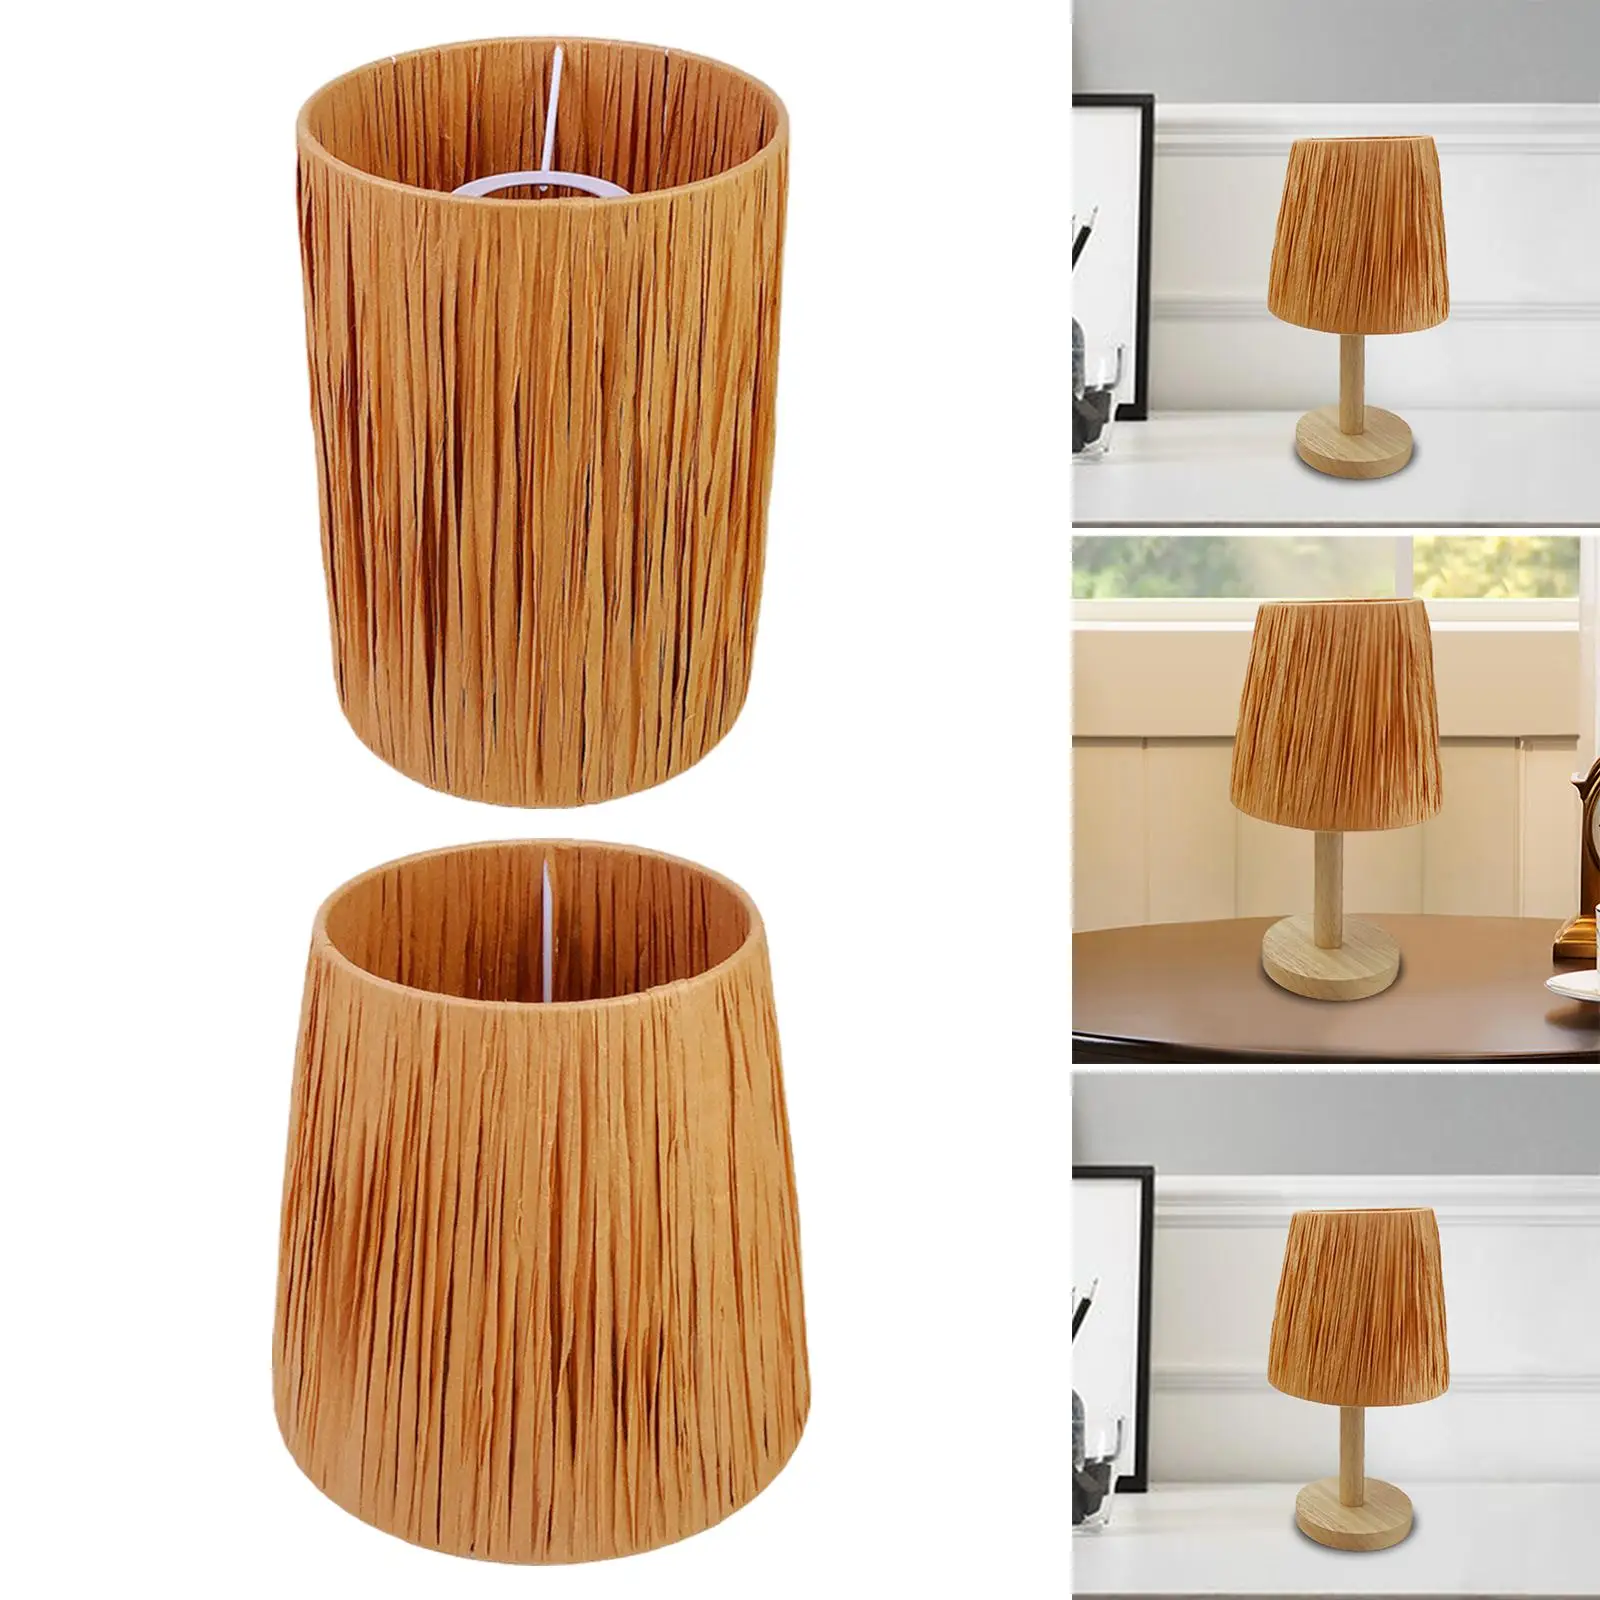 Lamp Shade Easy to Install Handwoven Stylish Raffia for Table Bedside Home